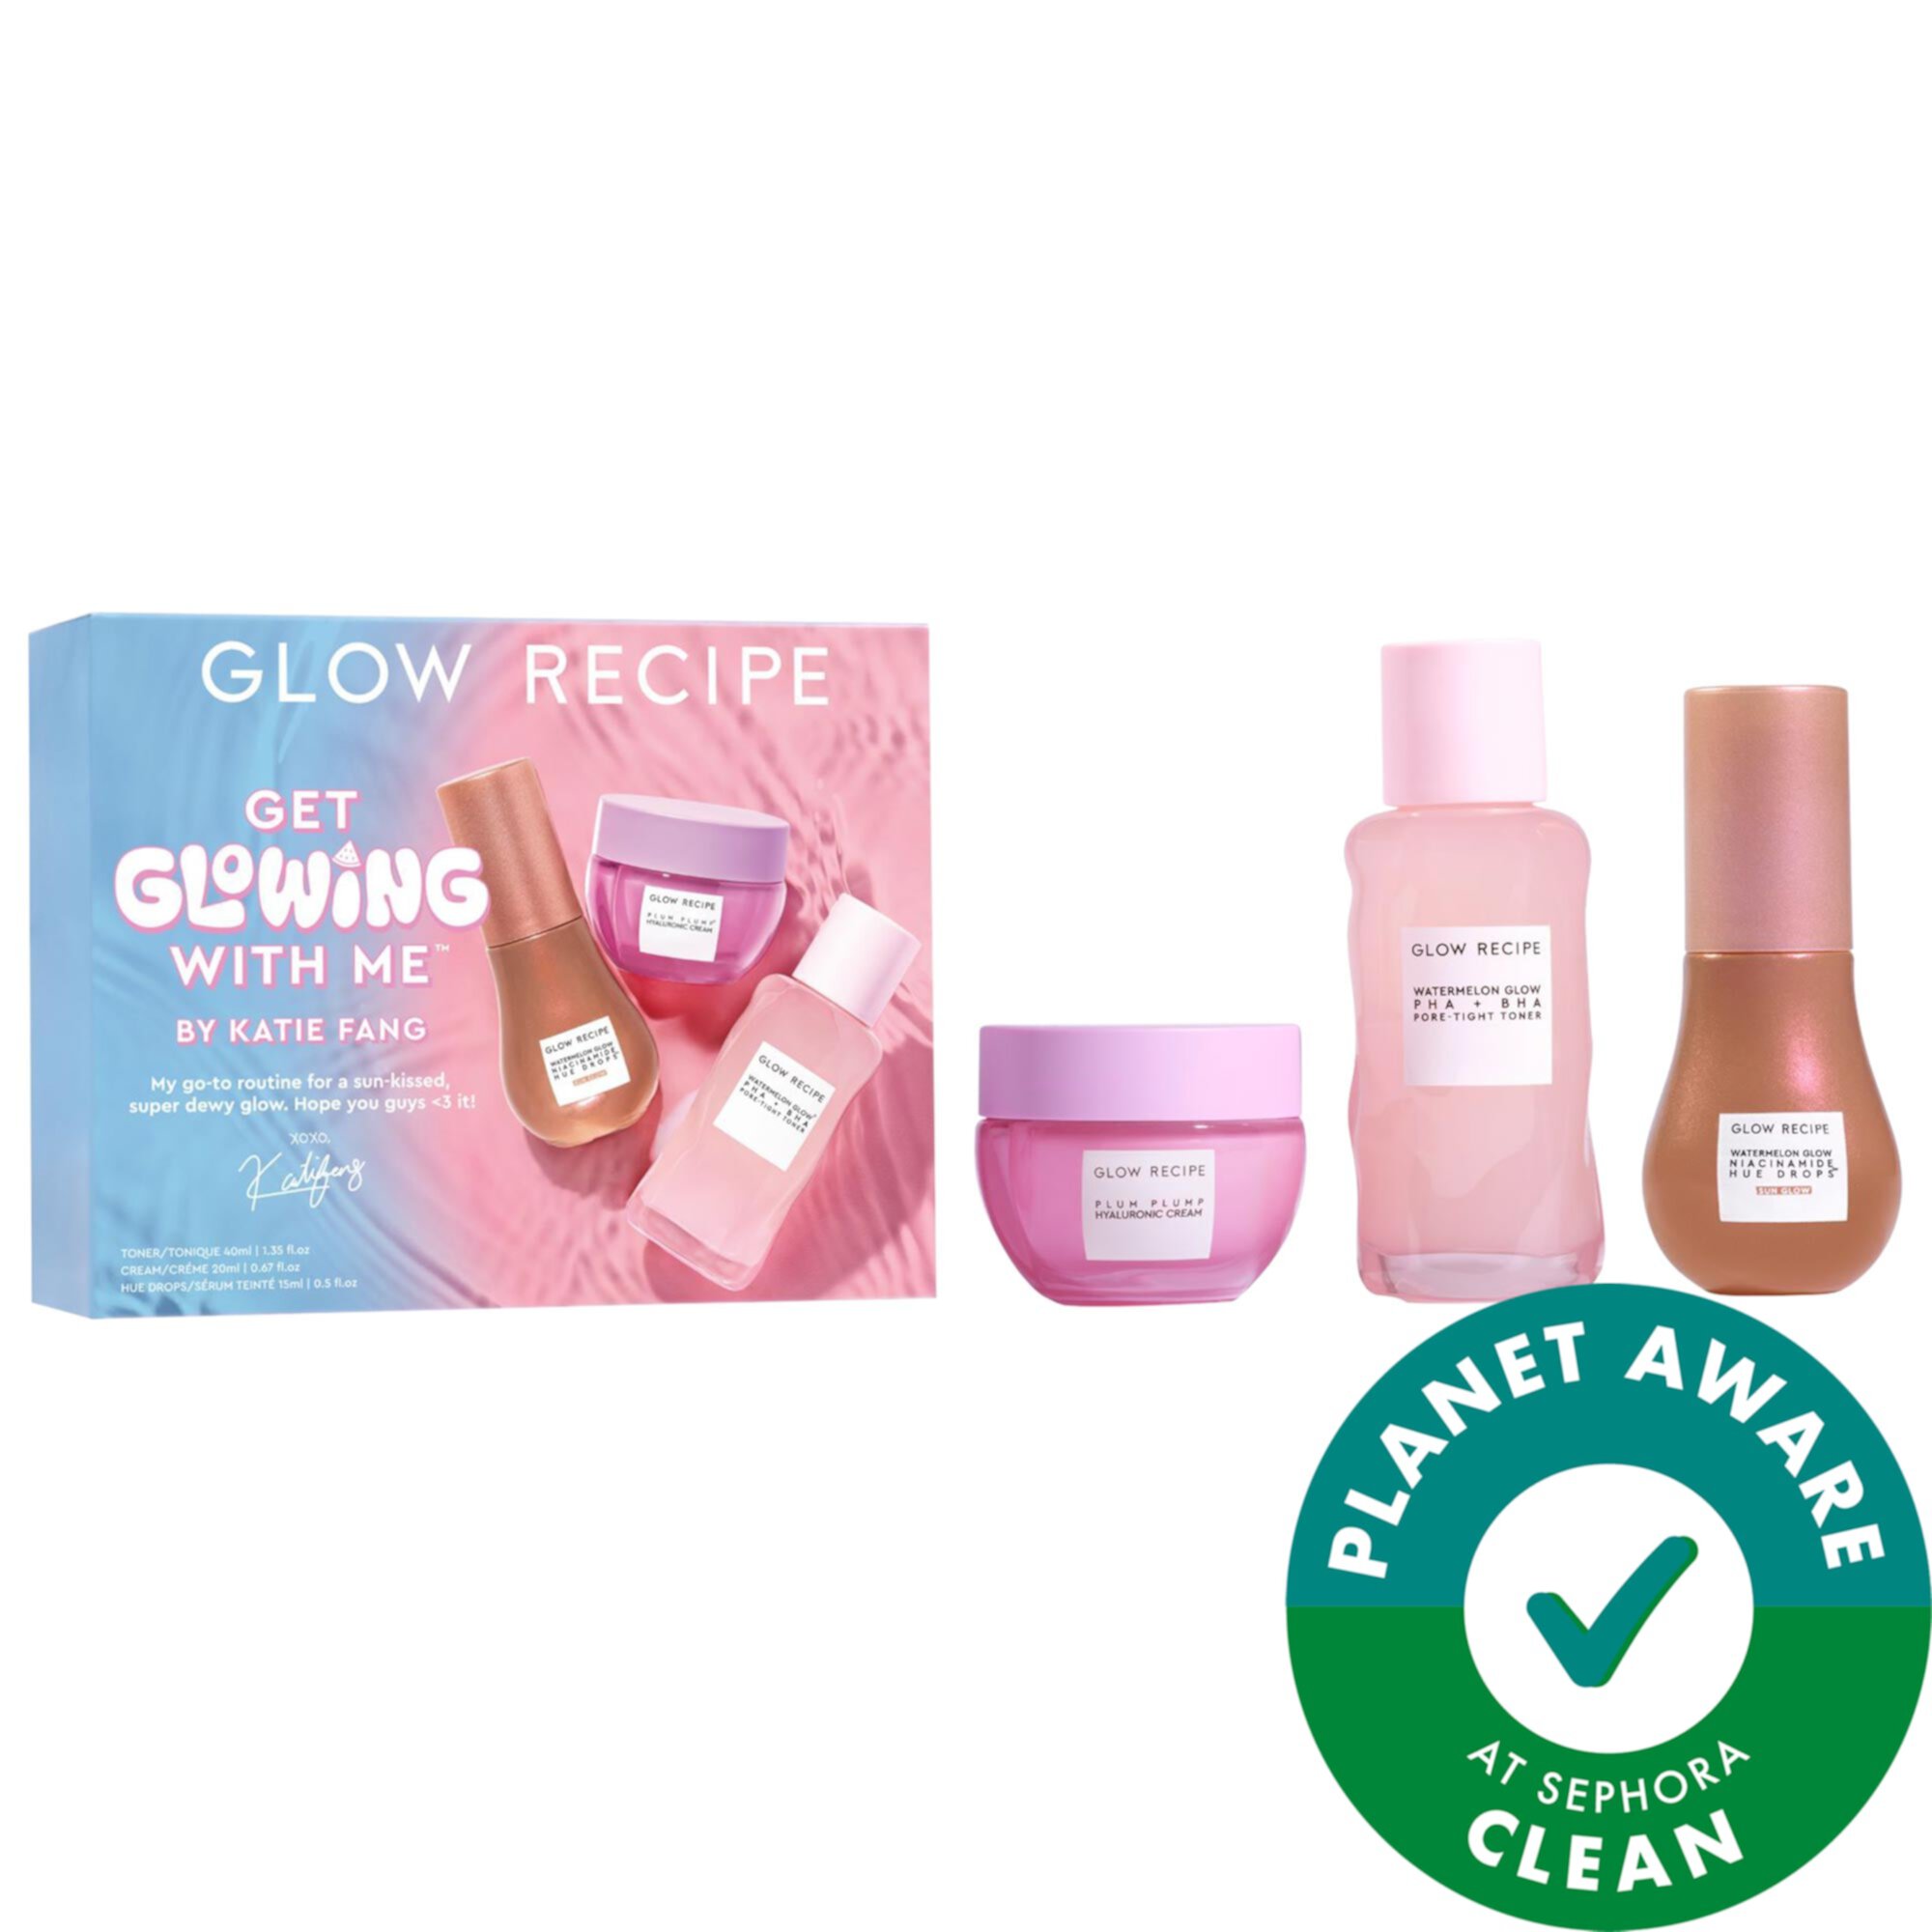 Get Glowing With Me™ Kit by Katie Fang with Hue Drops Tinted Serum Glow Recipe